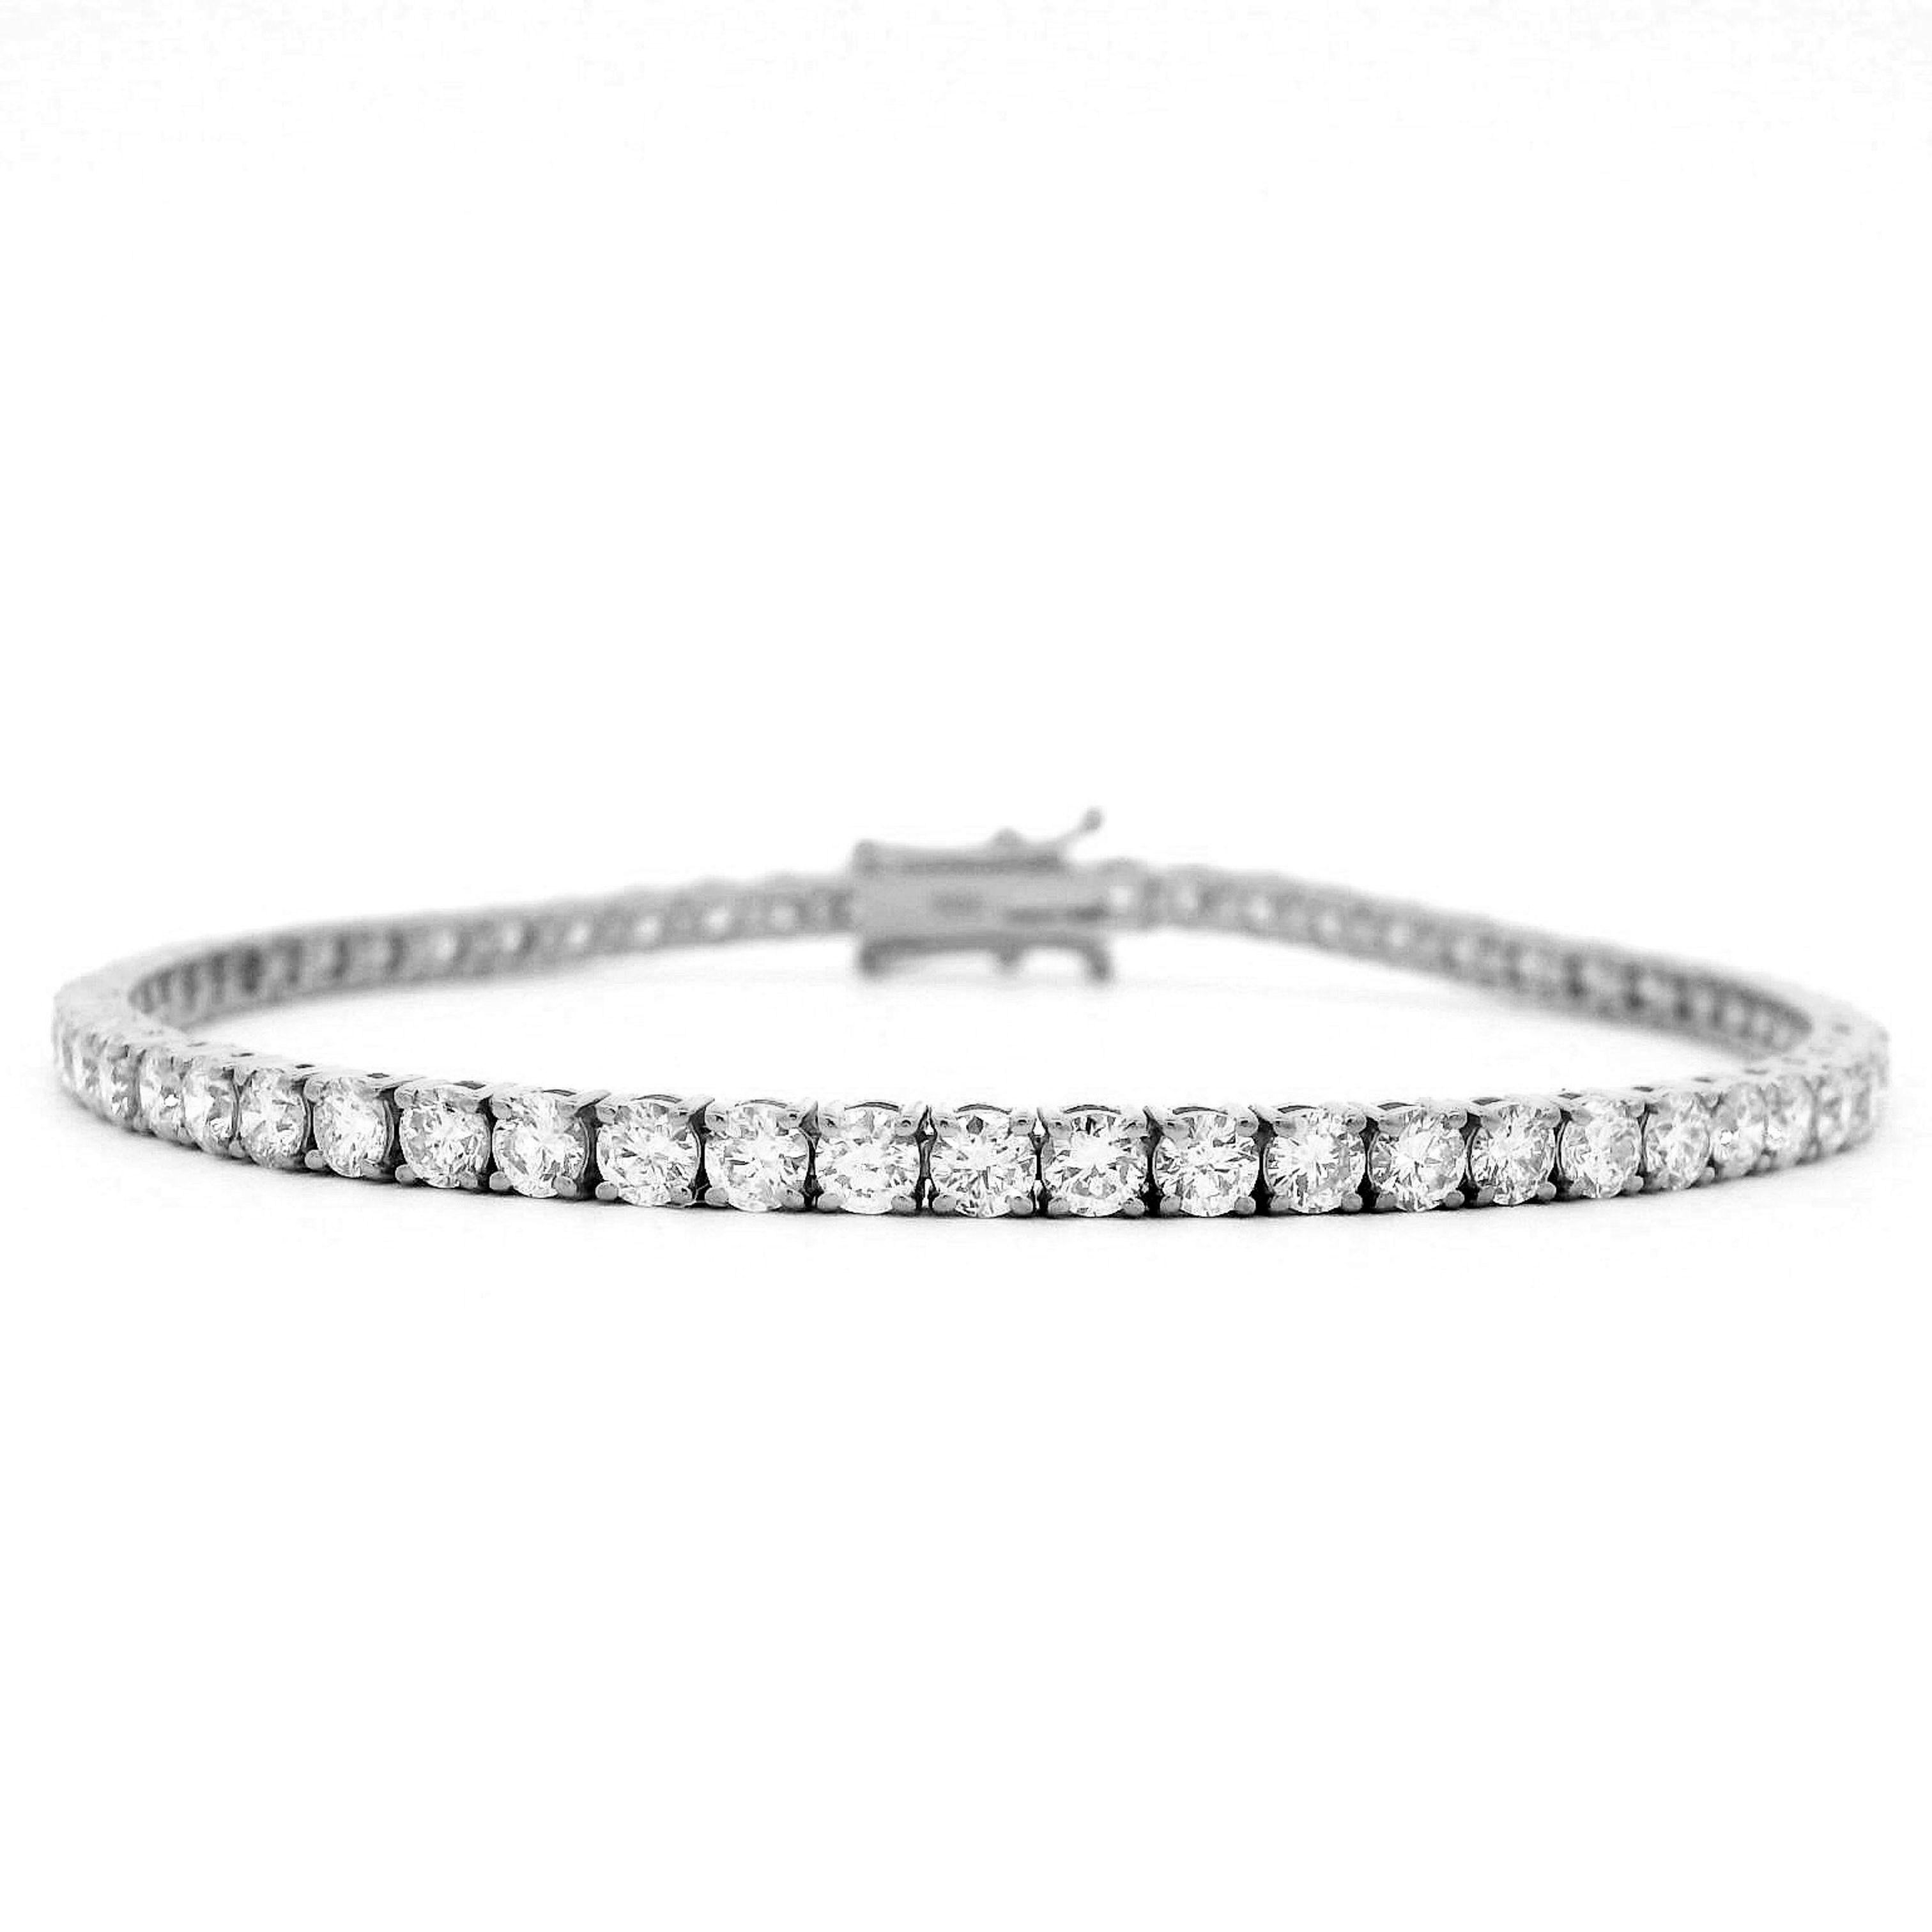 Exquisite and timeless illusion set diamonds tennis bracelet, by Alexander Beverly Hills.
62 round brilliant diamonds, 5.16 carats total. Approximately D-F color and SI clarity. Four prong set in 18k white gold, 9.42 grams, 7 inches. 
Accommodated